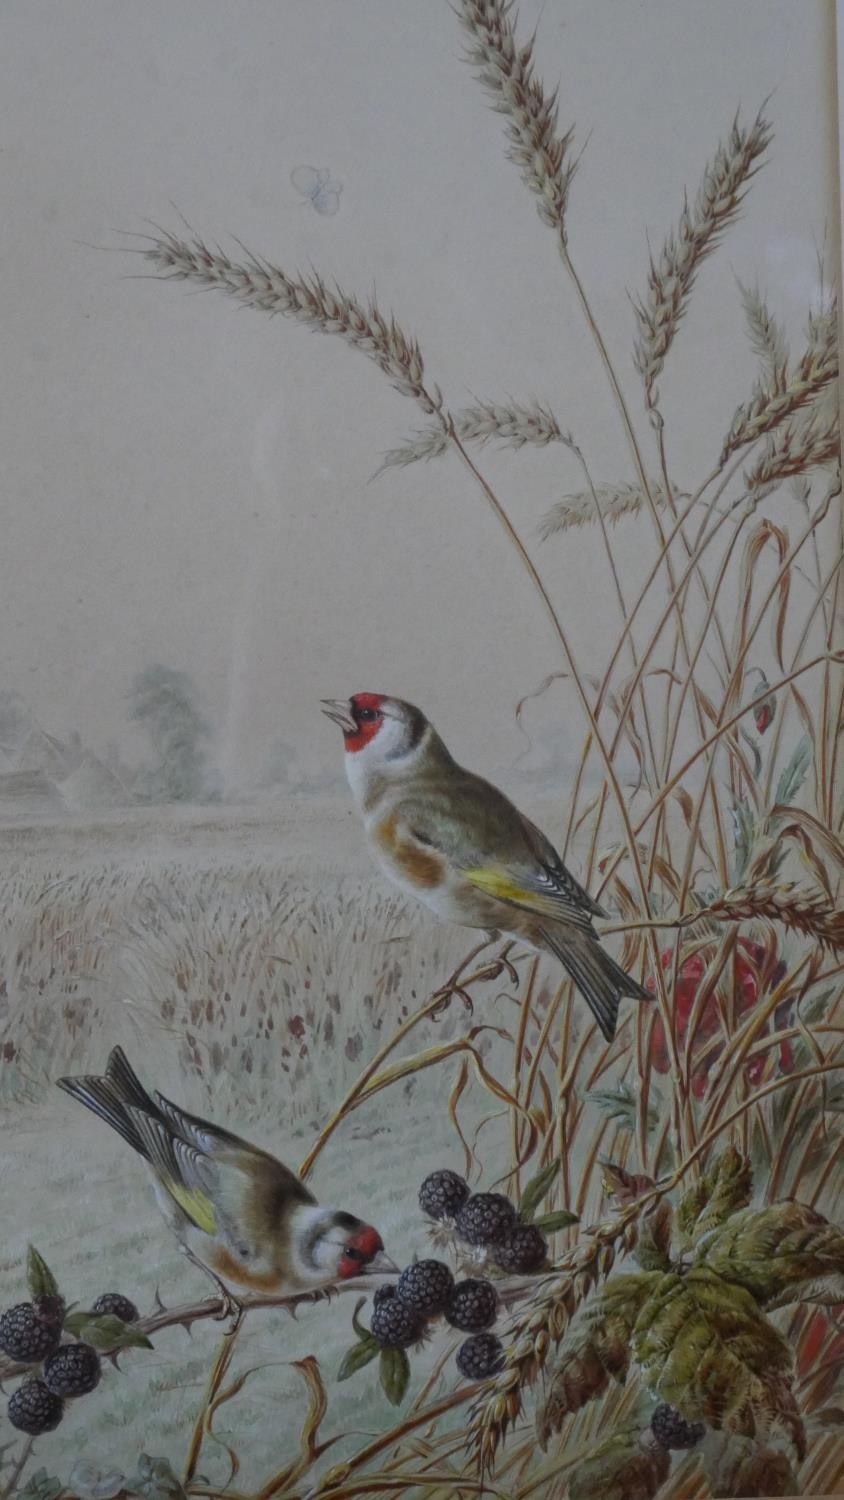 Harry Bright (1827 - 1922) - A framed and glazed gouache on paper of two Goldfinches in a wheat